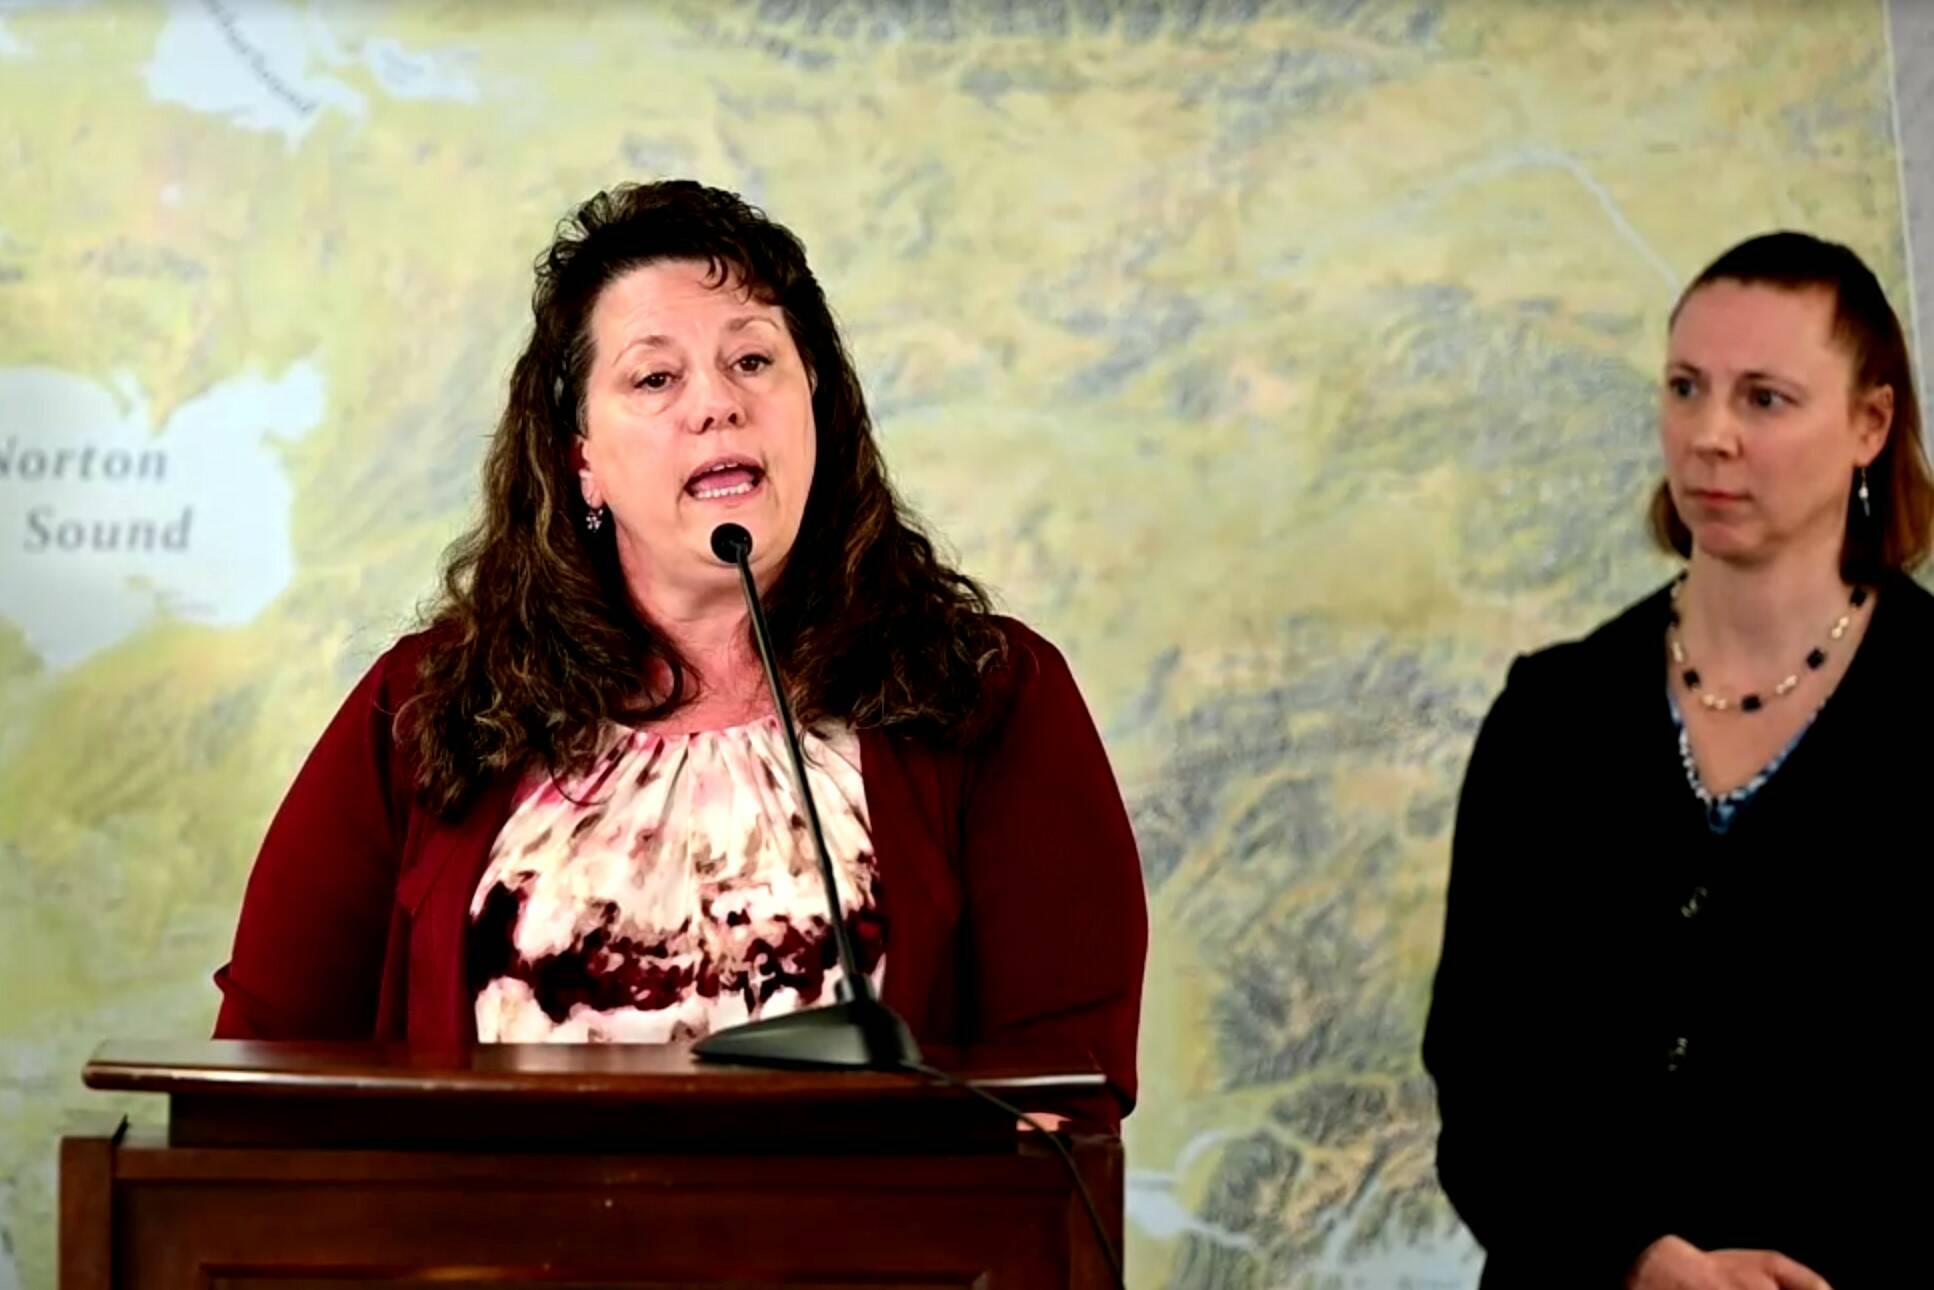 Alaska Department of Natural Resources Commissioner Corri Feigi, right, and Deputy Attorney General Cori Mills, announced alongside Gov. Mike Dunleavy the state was issuing lawsuits against the federal government for its failure to convey submerged lands to the state. Feige said at the conference the state's rule applied to navigable waterways including Mendenhall Lake and said motorized boats were allowed on the lake. (Screenshot)